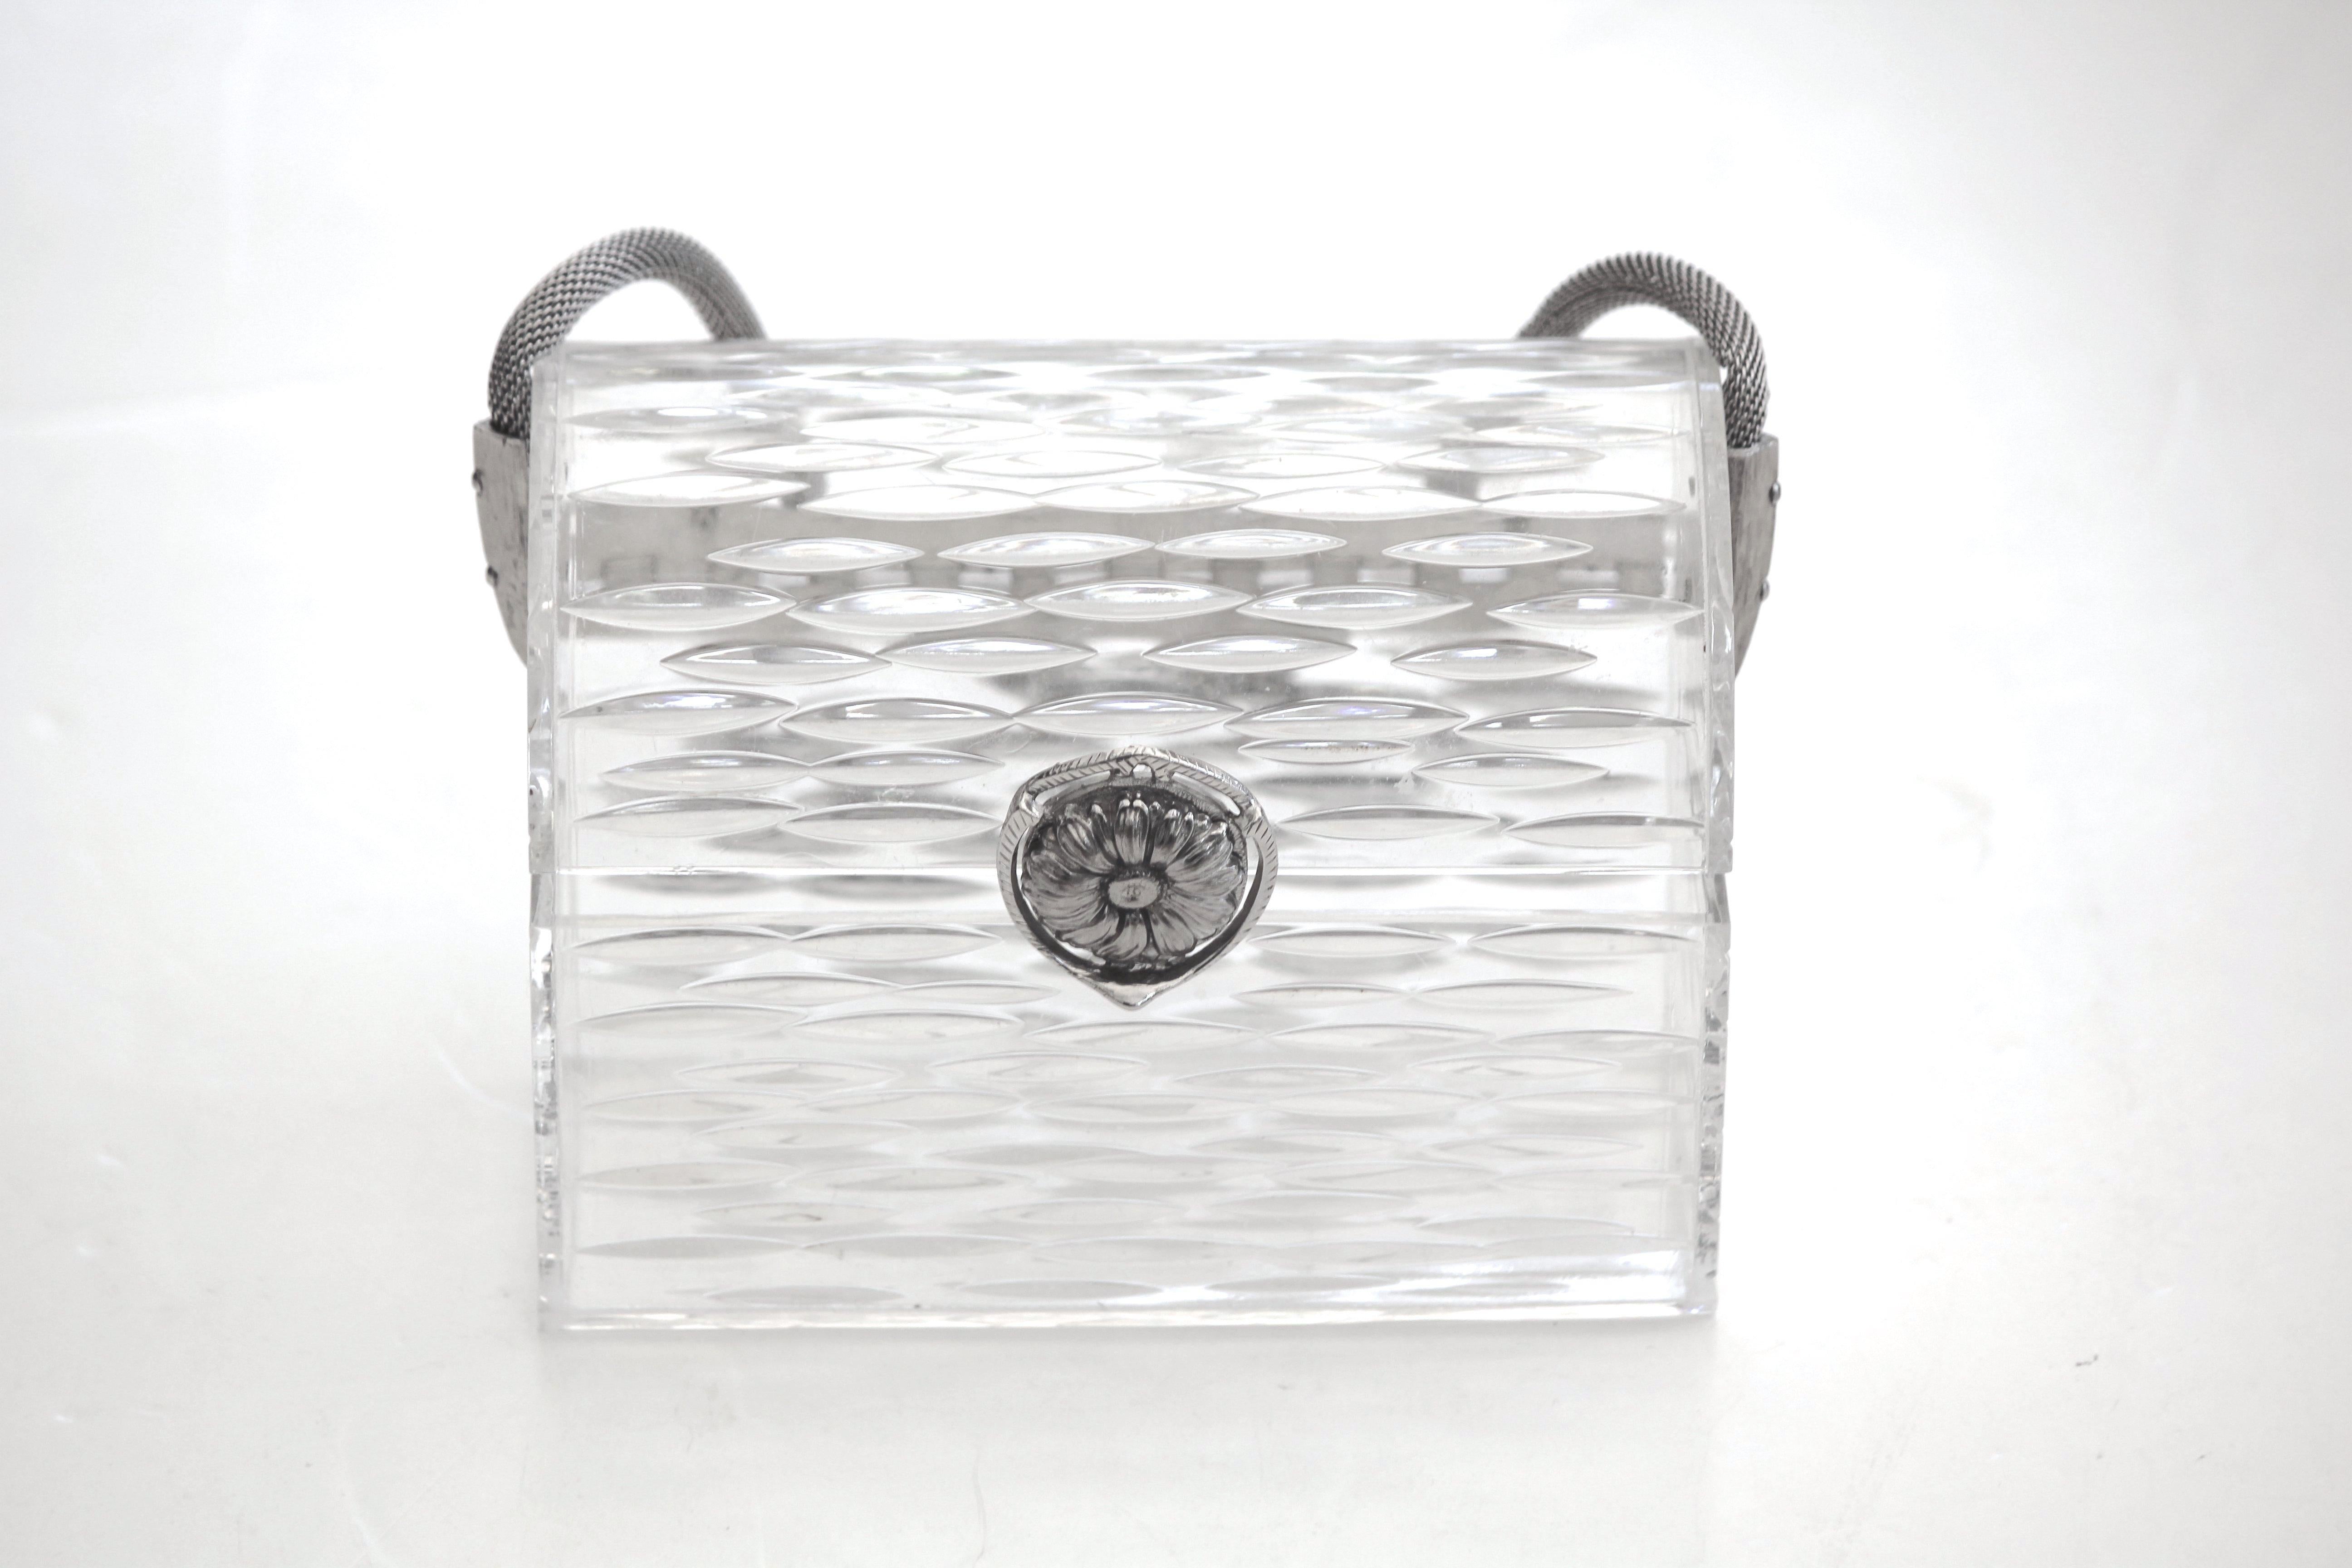 From a Fashionista to a Fashionista!
Stunning clear dimensional design Lucite handbag, beautiful silver flower clasp, two silver mesh handles, which has a bend at the end handle on one side, gleaming silver hardware...marked Wilardy inside on